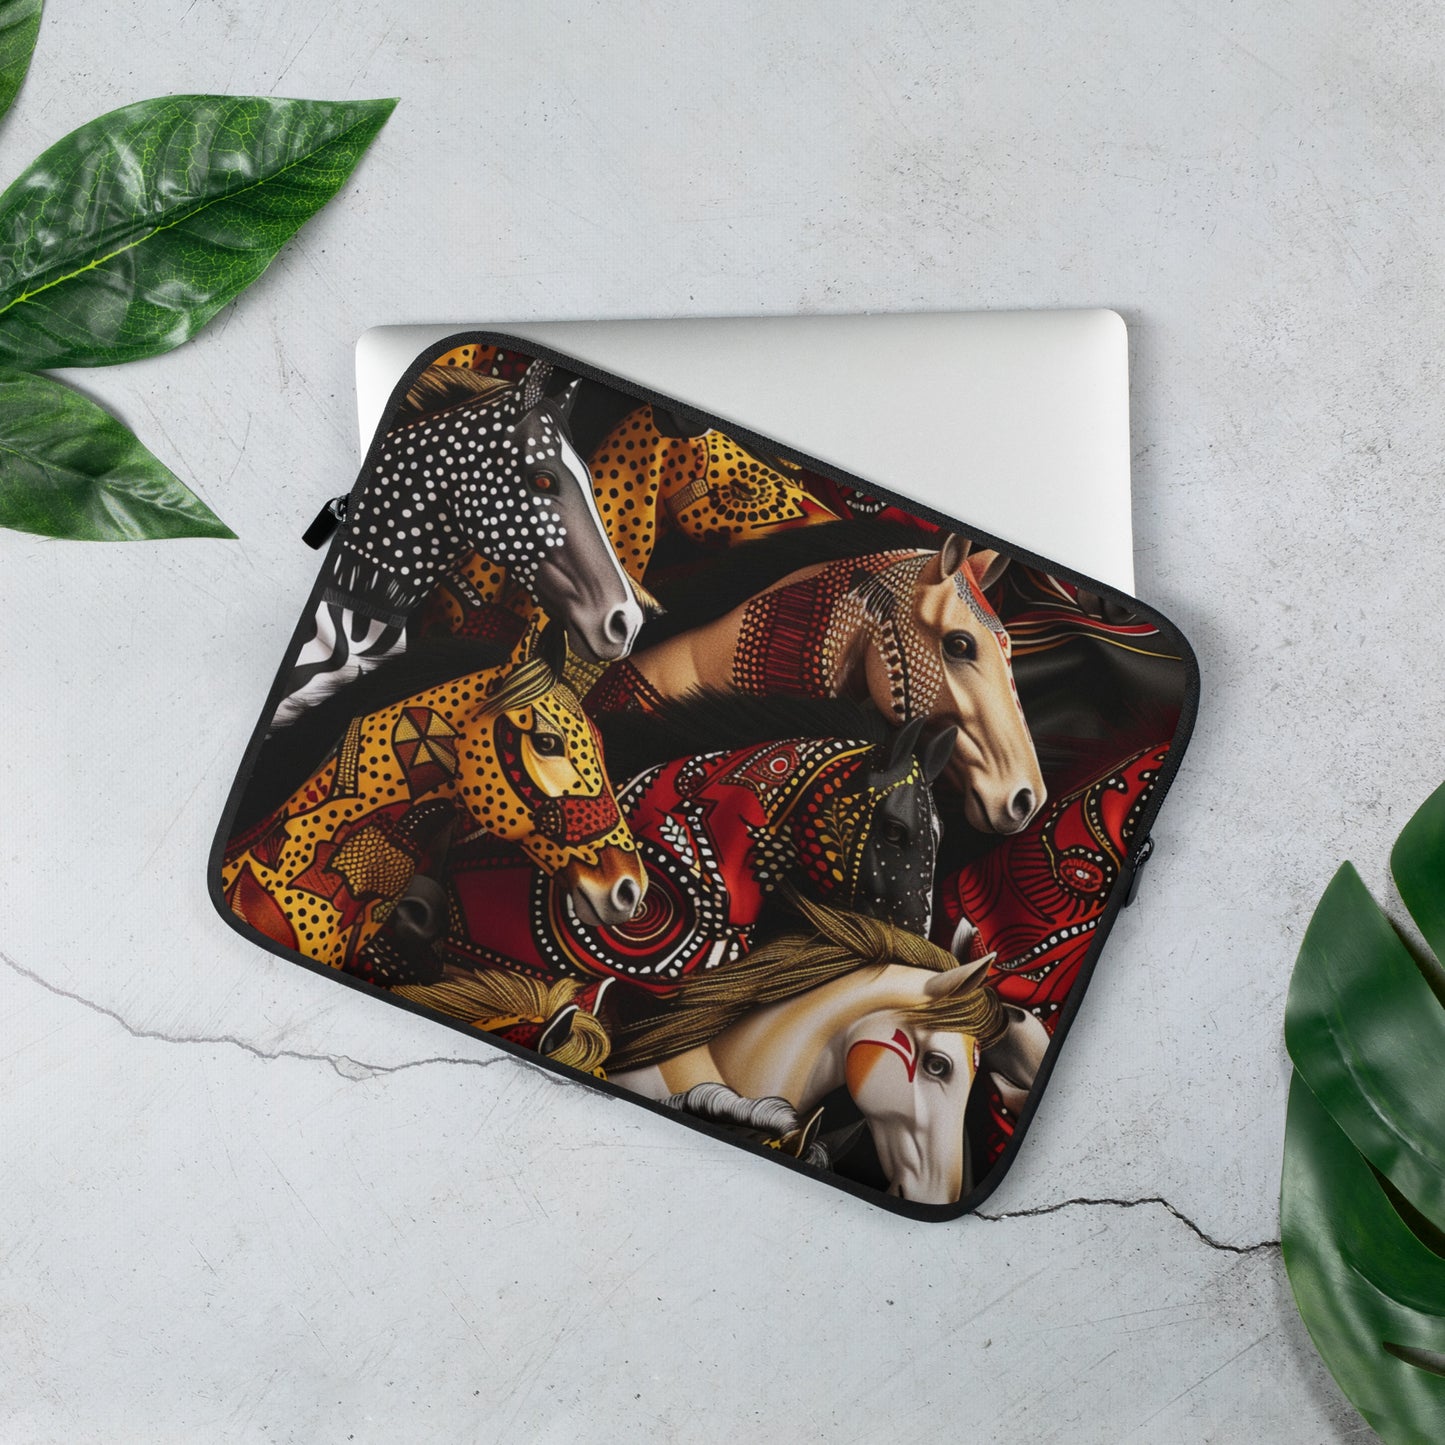 African Ankara Horse Parade Design: Vibrant Patterned Laptop Sleeve - Perfect for Gifting